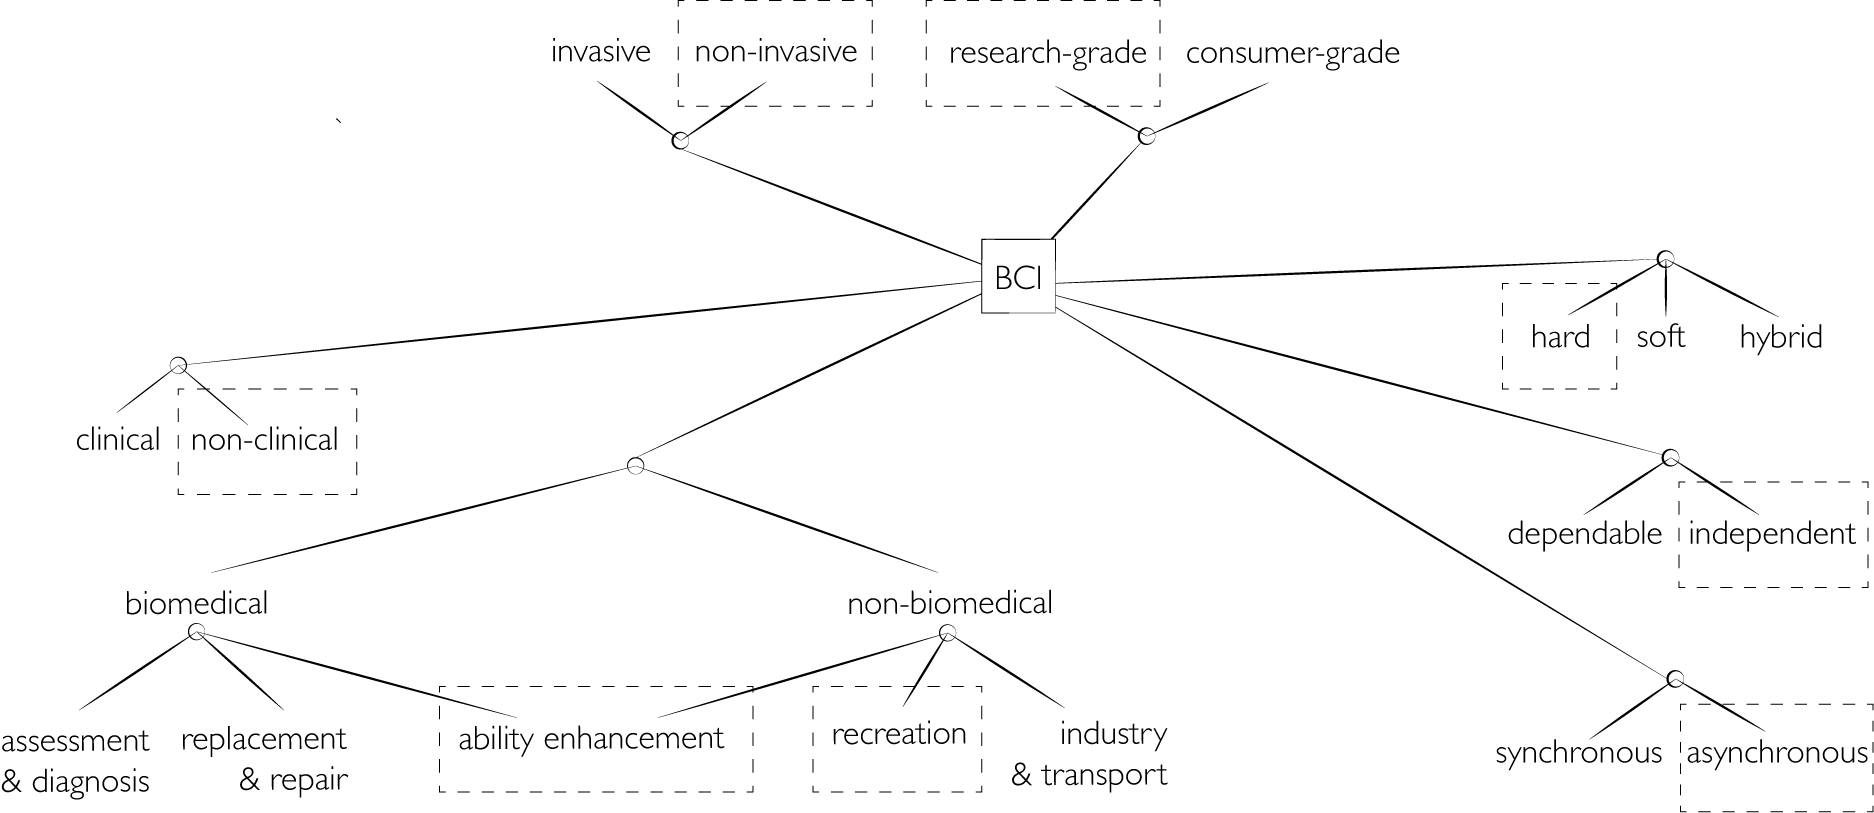 A tree diagram visualising on-line BCI classifications based on invasiveness, grade, interfacing, dependability, synchronisation and usability. The dotted lines indicate how the BCMI-2 system developed in this research can be classified. 'Ability enhancement' links to the research testing this system's suitability in NFT, and 'recreation' in artistic performance settings.